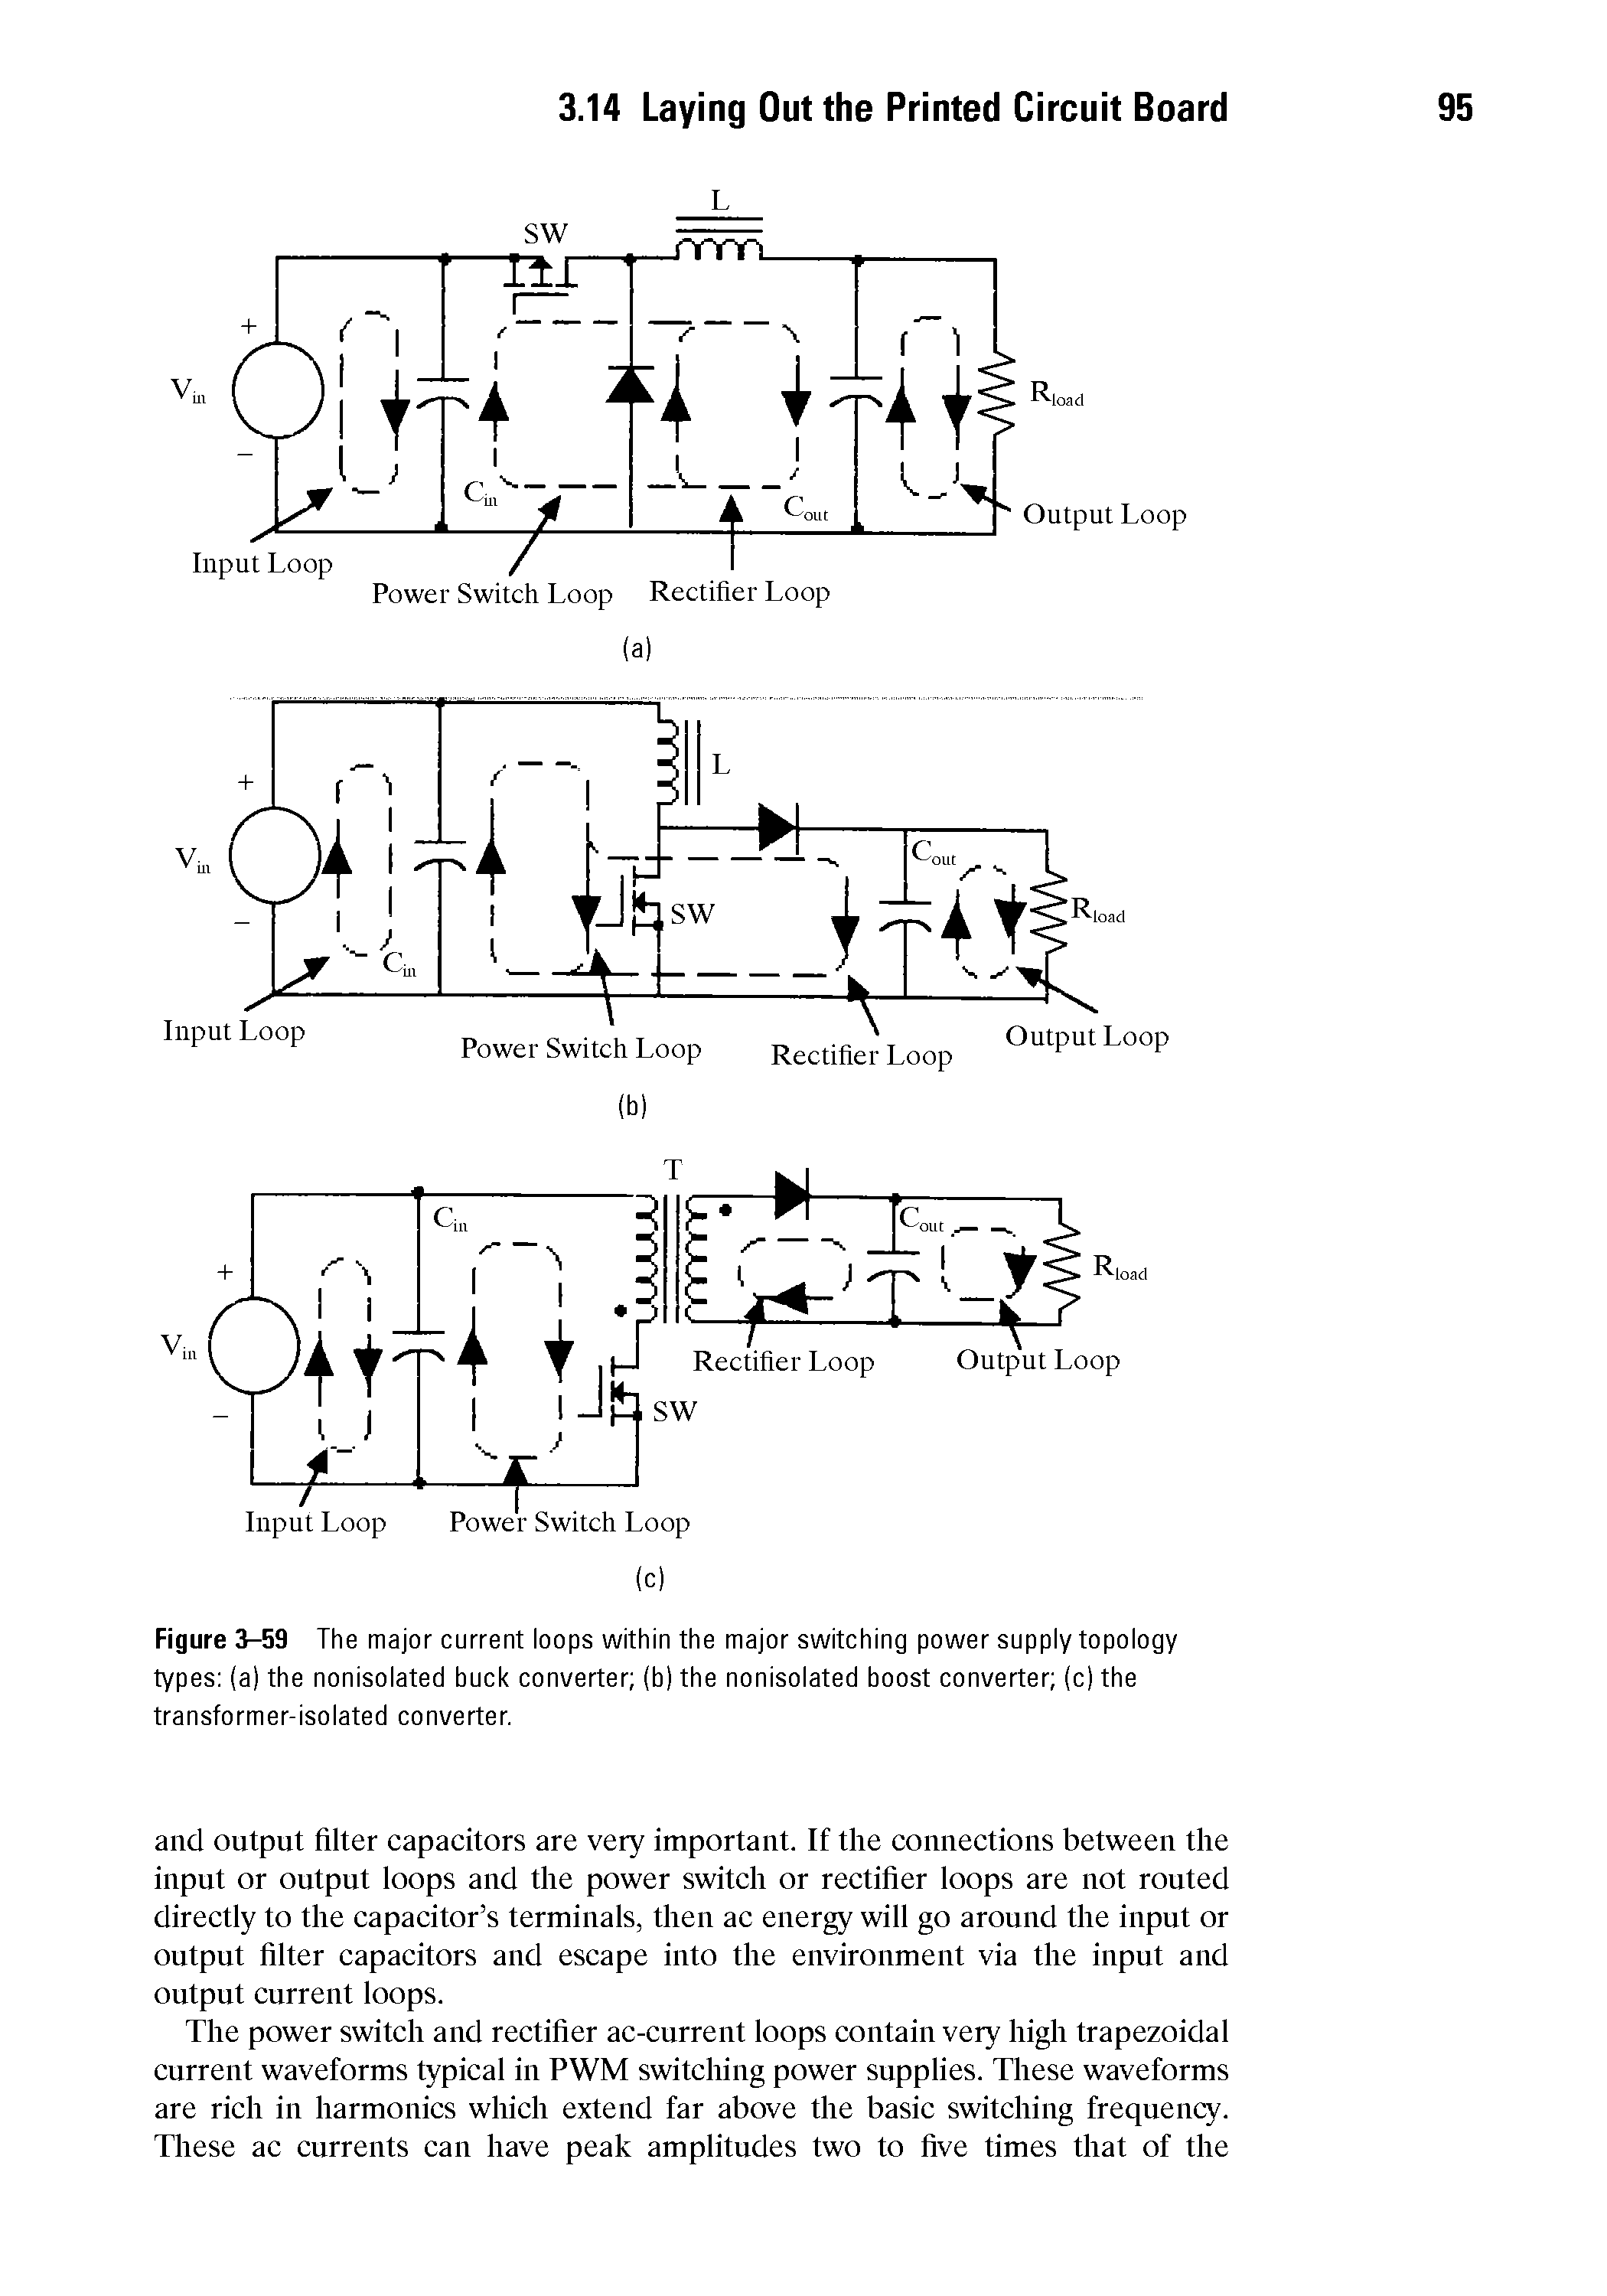 Figure 3-59 The major current loops within the major switching power supply topology types (a) the nonisolated buck converter (h) the nonisolated boost converter (c) the transformer-isolated converter.